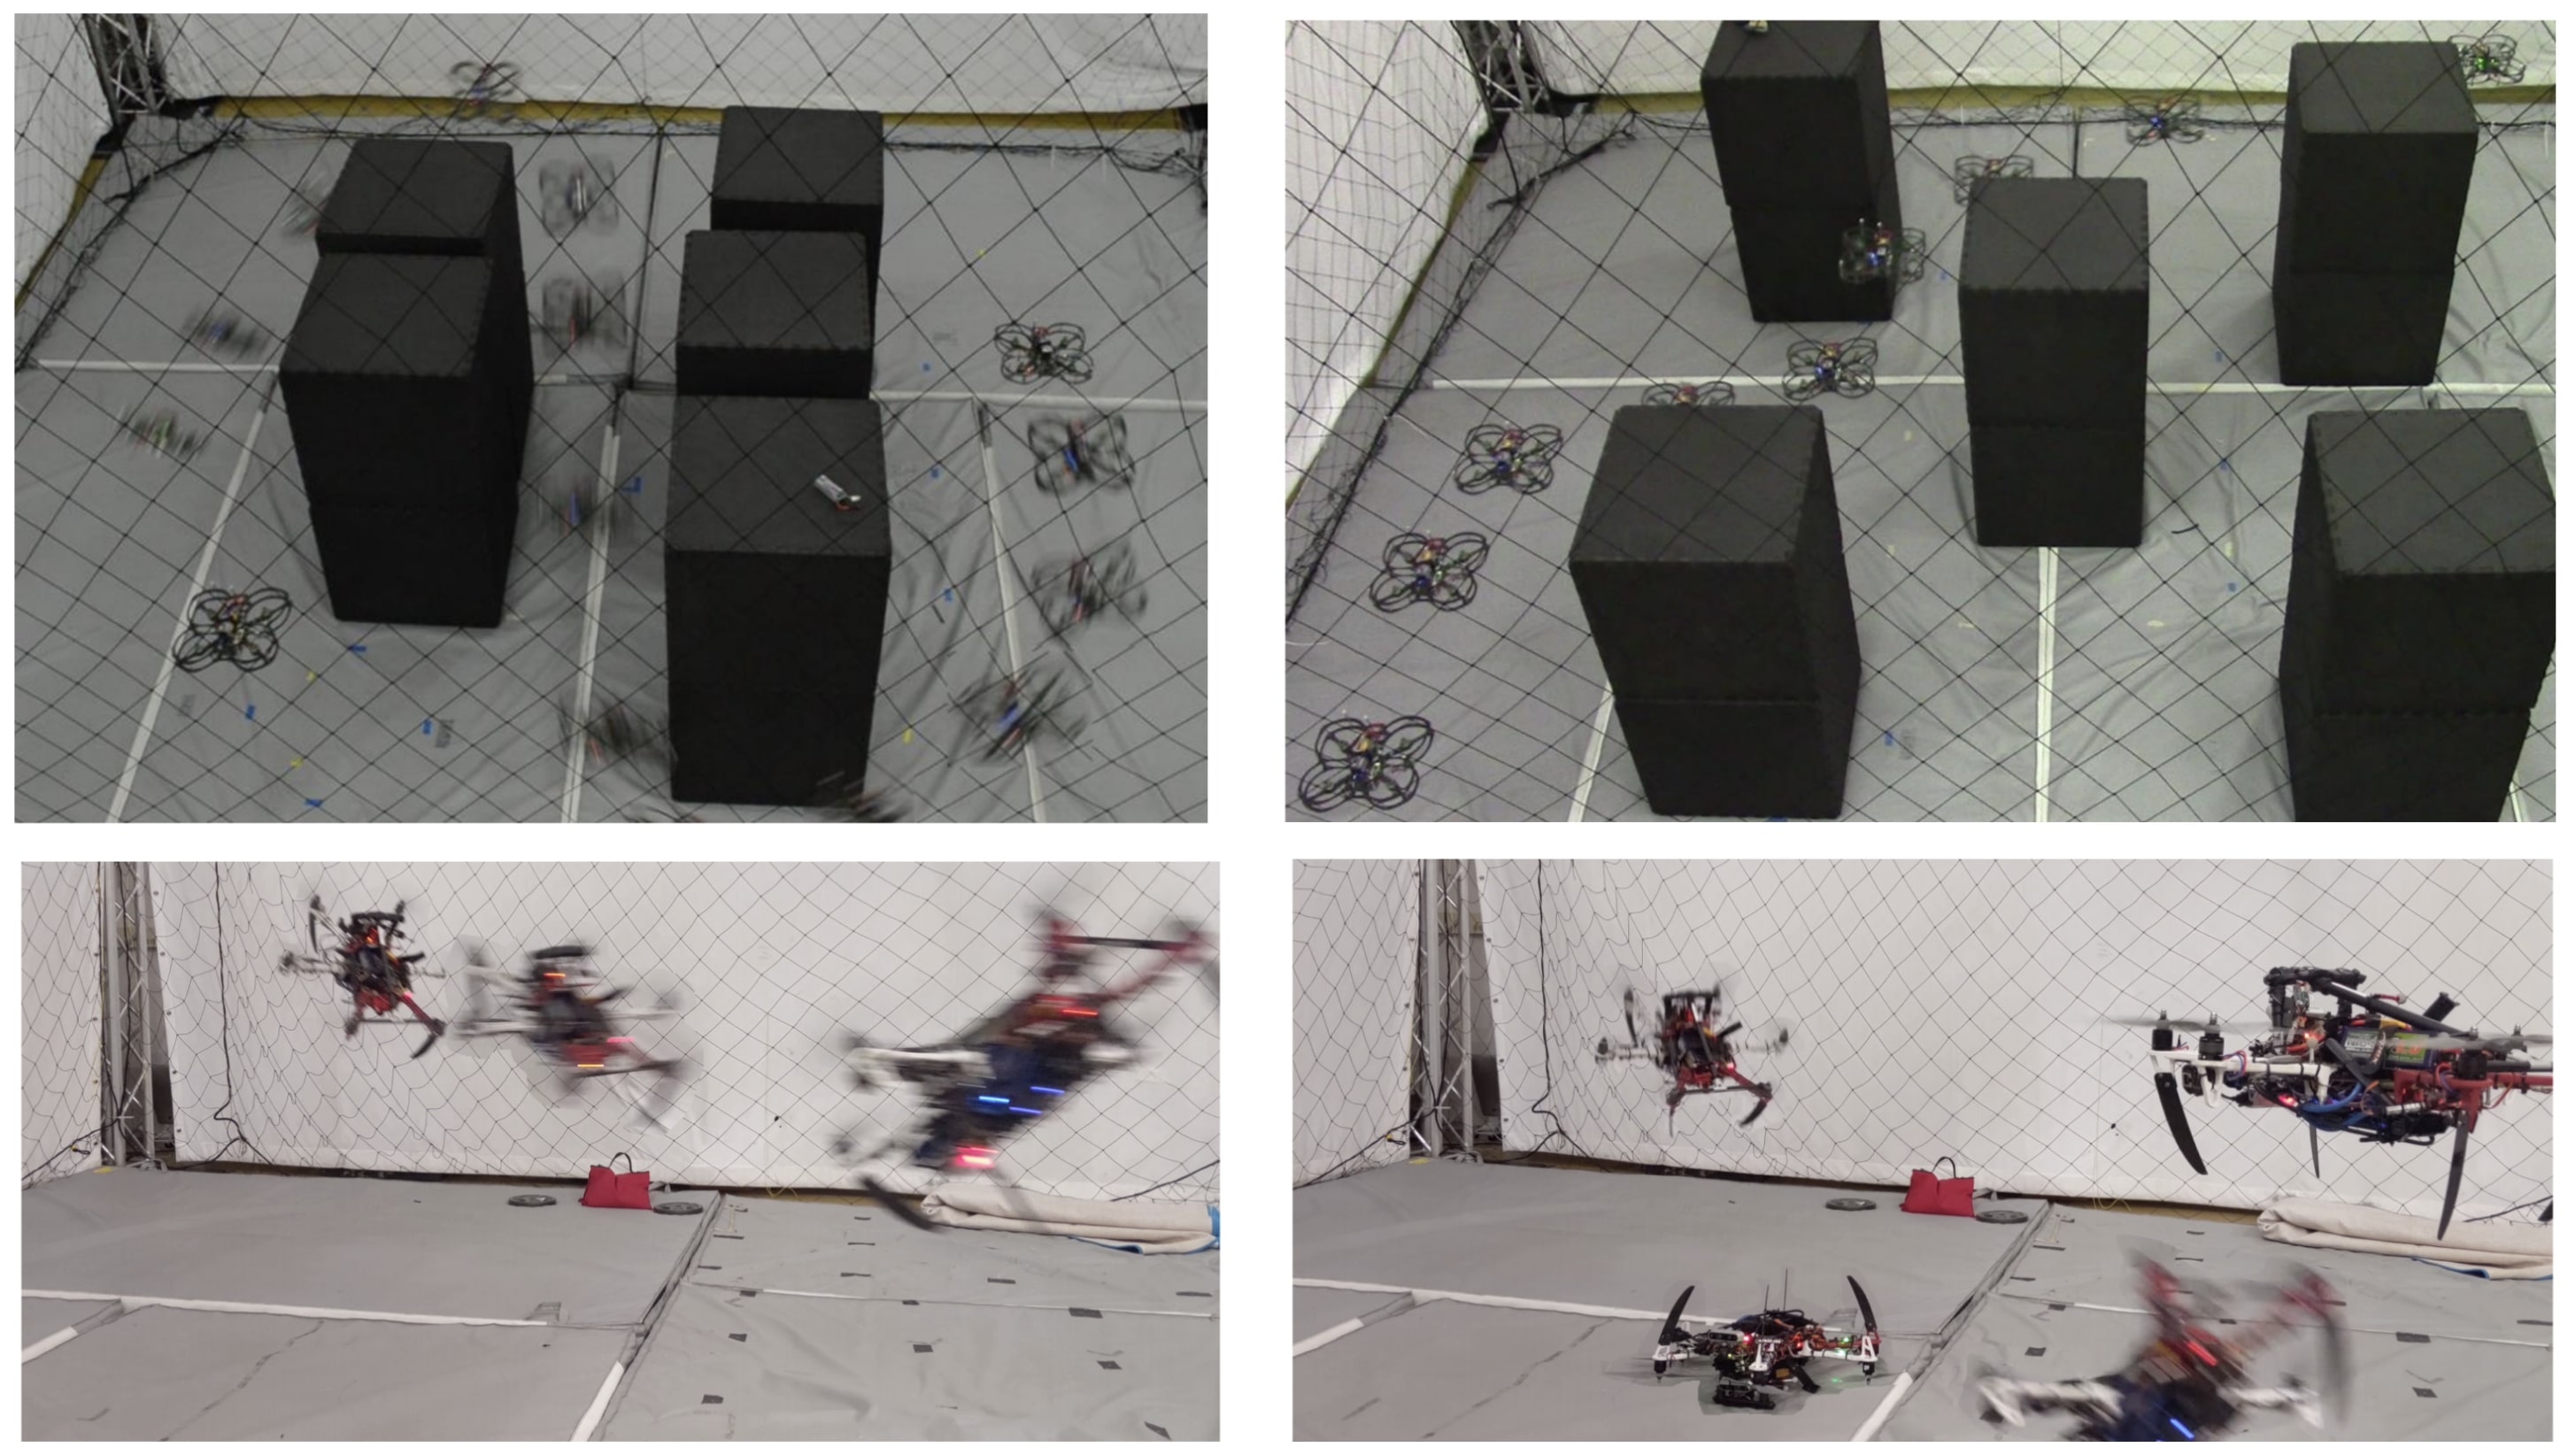 Aggressive Flight Performance using Robust Experience-driven Predictive Control Strategies: Experimentation and Analysis